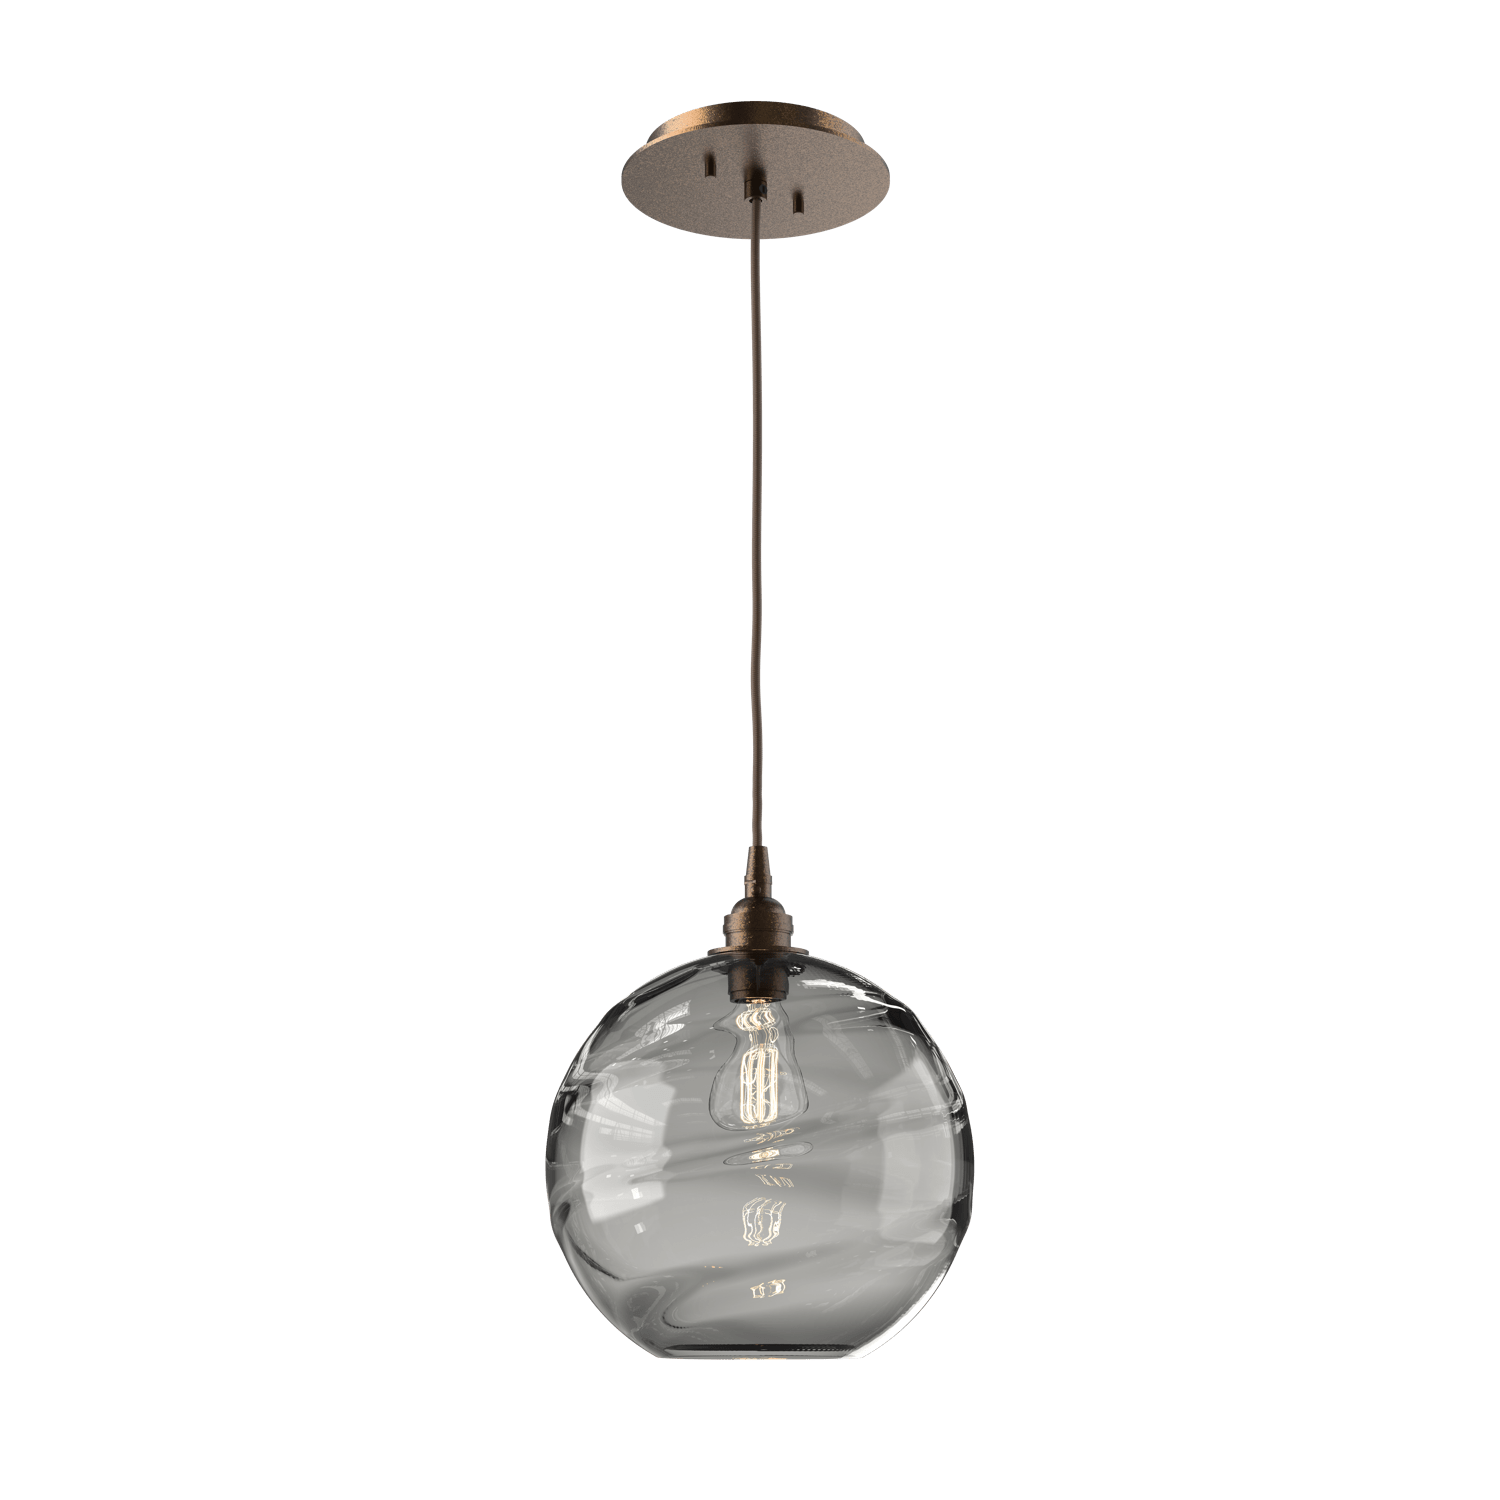 LAB0047-01-FB-OS-Hammerton-Studio-Optic-Blown-Glass-Terra-pendant-light-with-flat-bronze-finish-and-optic-smoke-blown-glass-shades-and-incandescent-lamping